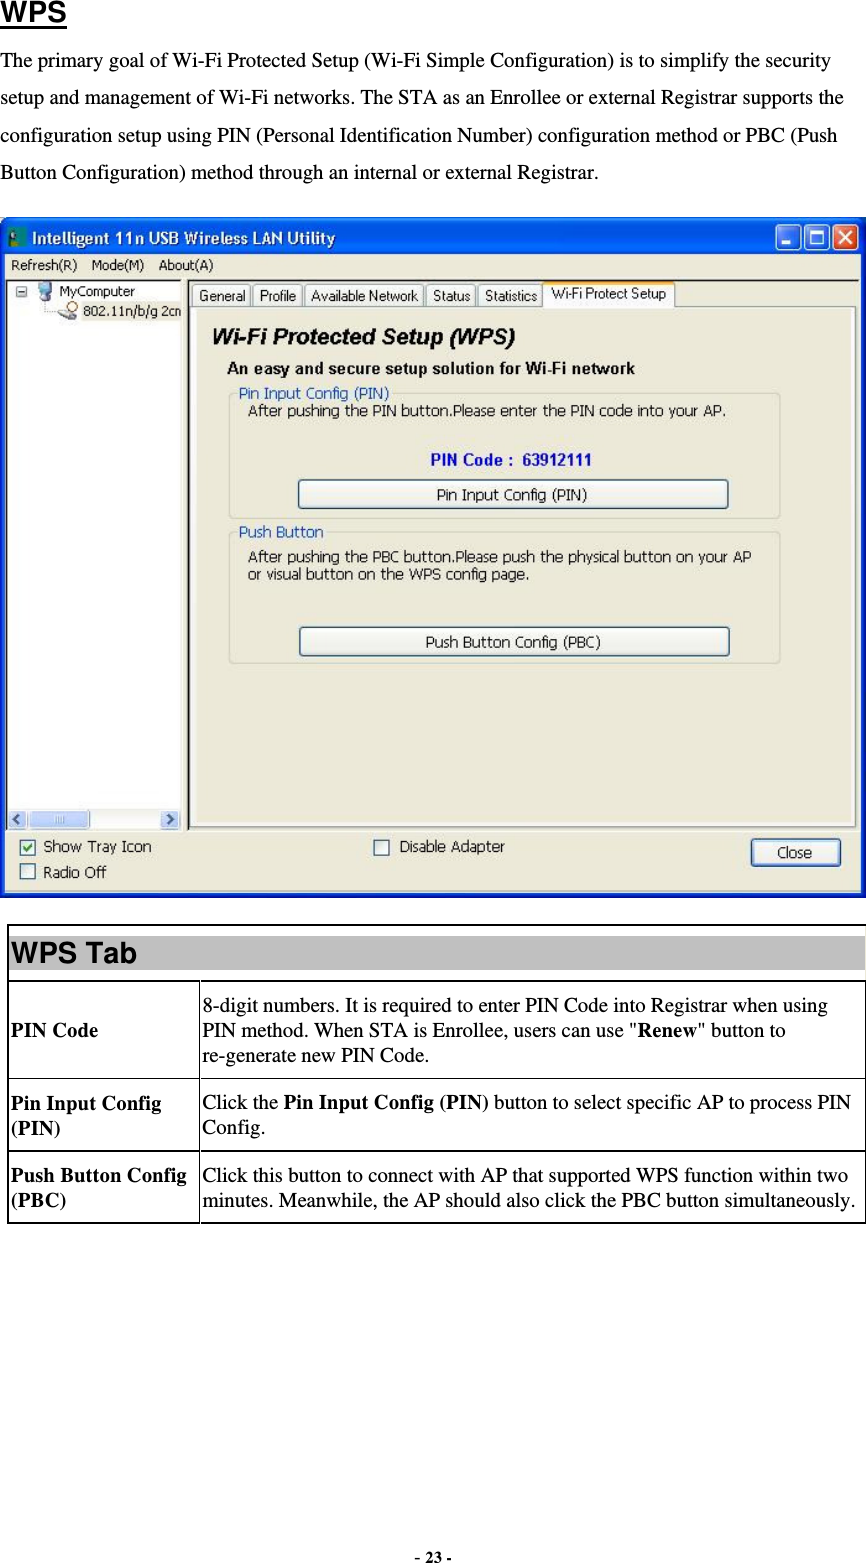  - 23 - WPS The primary goal of Wi-Fi Protected Setup (Wi-Fi Simple Configuration) is to simplify the security setup and management of Wi-Fi networks. The STA as an Enrollee or external Registrar supports the configuration setup using PIN (Personal Identification Number) configuration method or PBC (Push Button Configuration) method through an internal or external Registrar.  WPS Tab PIN Code 8-digit numbers. It is required to enter PIN Code into Registrar when using PIN method. When STA is Enrollee, users can use &quot;Renew&quot; button to re-generate new PIN Code. Pin Input Config (PIN) Click the Pin Input Config (PIN) button to select specific AP to process PIN Config. Push Button Config (PBC) Click this button to connect with AP that supported WPS function within two minutes. Meanwhile, the AP should also click the PBC button simultaneously. 